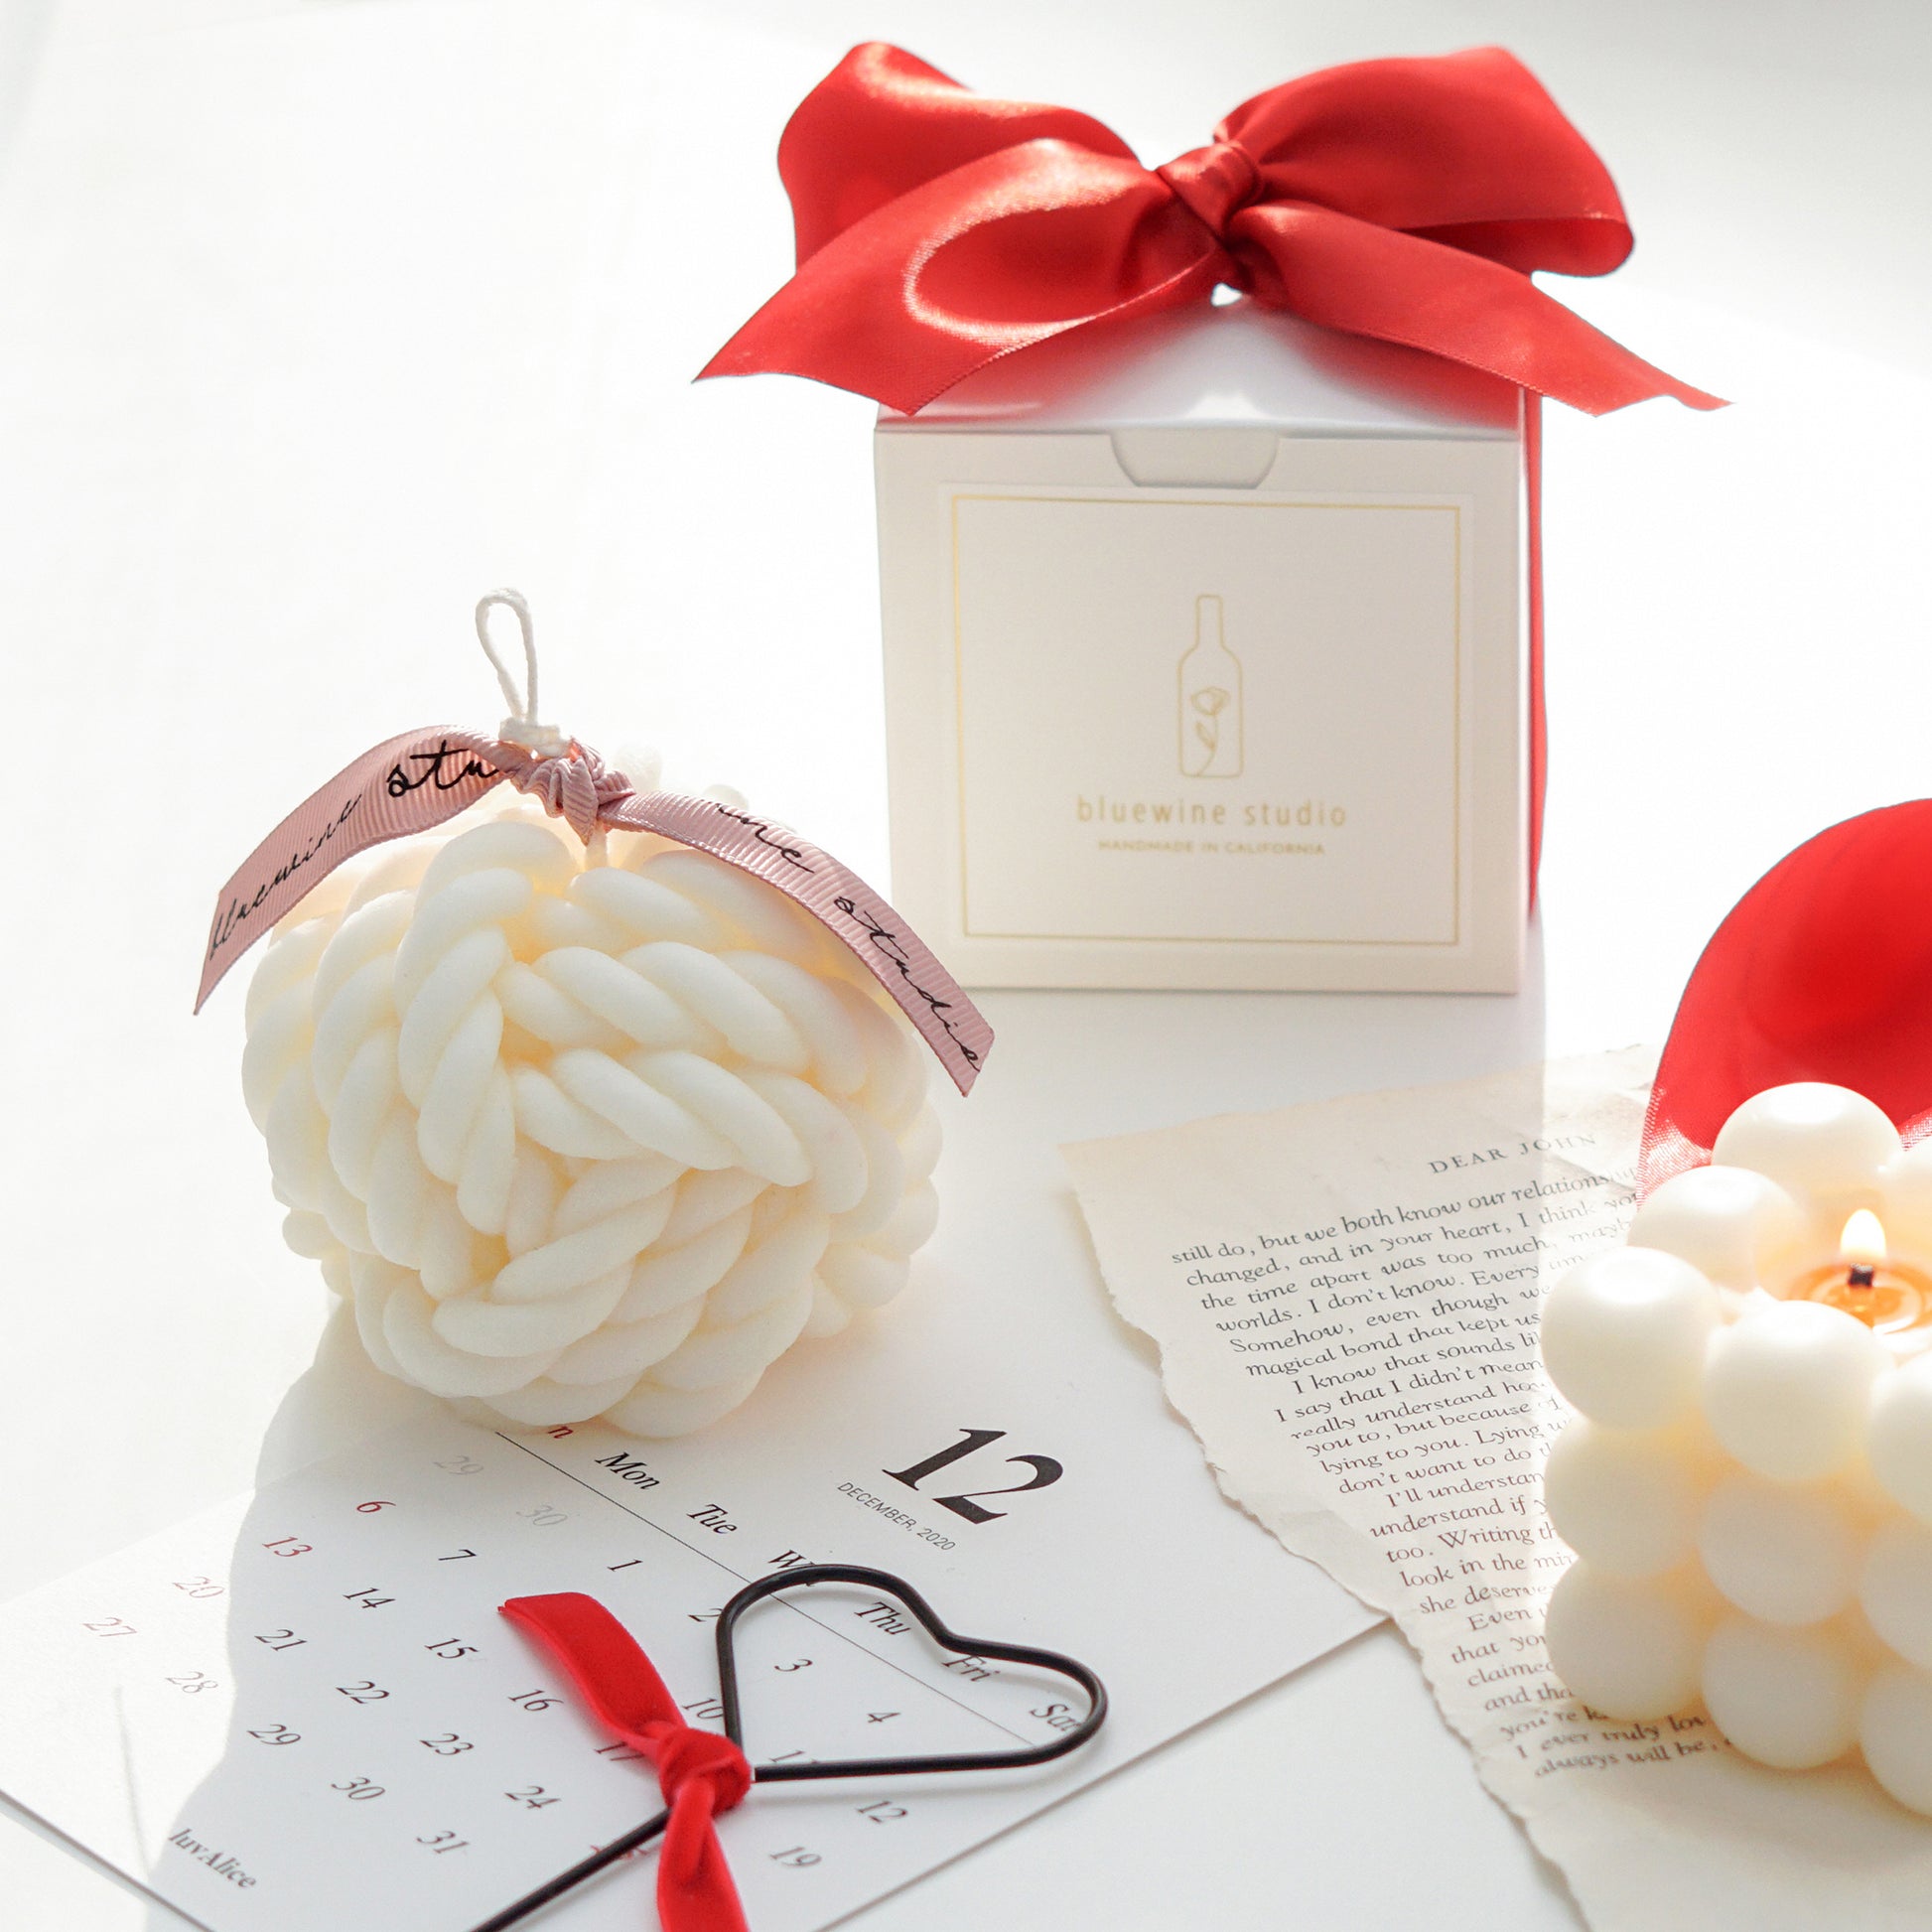 a yarn ball shape white soy pillar candle with pink bluewine studio ribbon, black heart shape wick dipper, december calendar postcard, a lit square bubble cube soy candle on a book page, and a white square bluewine studio box with red ribbon